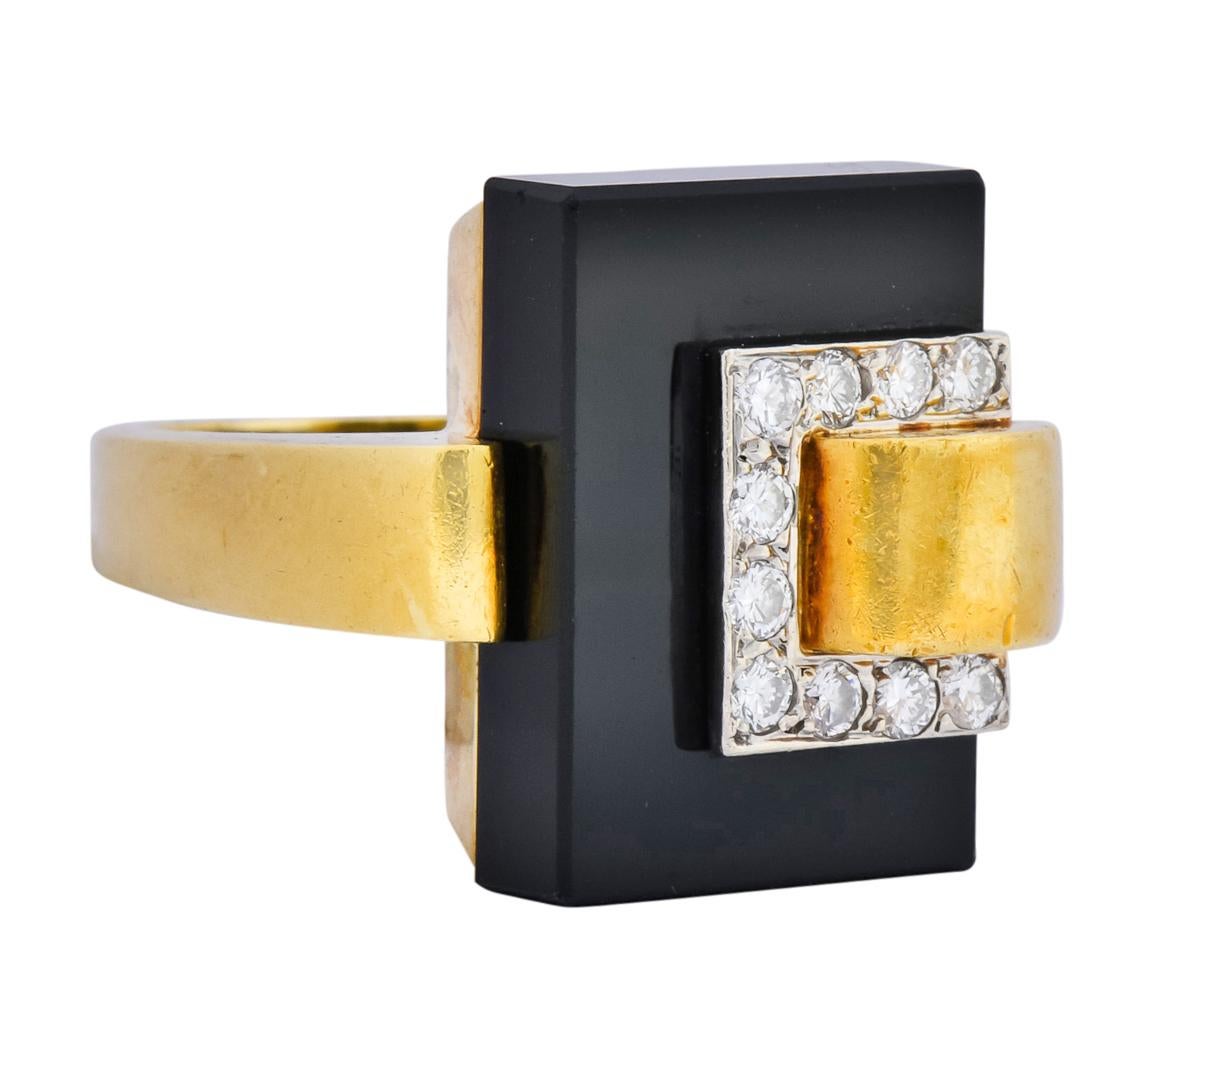 Centering a rectangular onyx tablet measuring approximately 13/16 x 9/16 inch, opaque and a glossy black

Accented by round brilliant cut diamonds, bead set in white gold, weighing approximately 0.40 carat, H/I color and VS clarity

Completed by